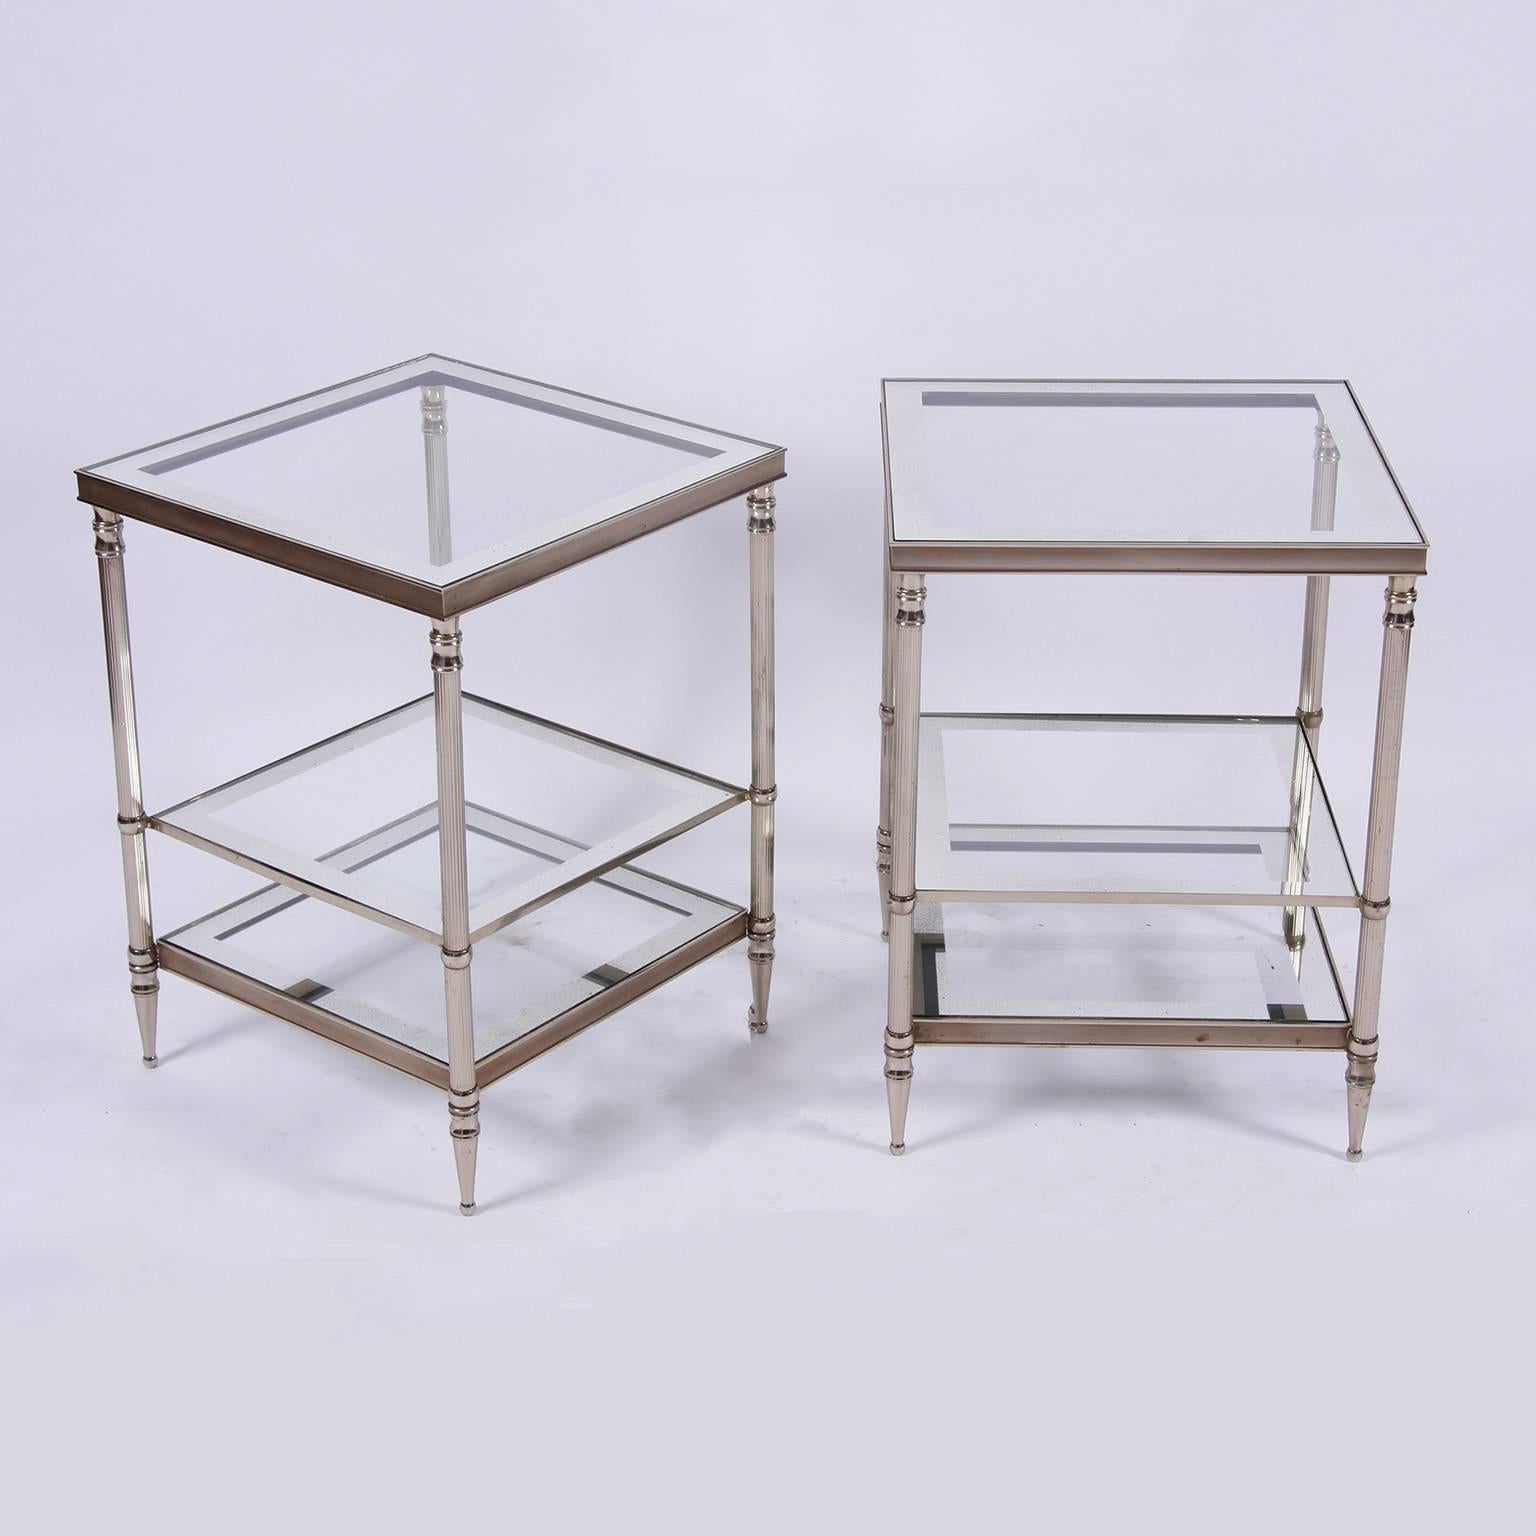 A stunning pair of French Mid-Century metal side tables, nickel-plated with fluted legs and tapering feet. Three tier with clear glass with an antiqued mirror edge.

Measures: Height 54cm, width 40cm, depth 40cm.